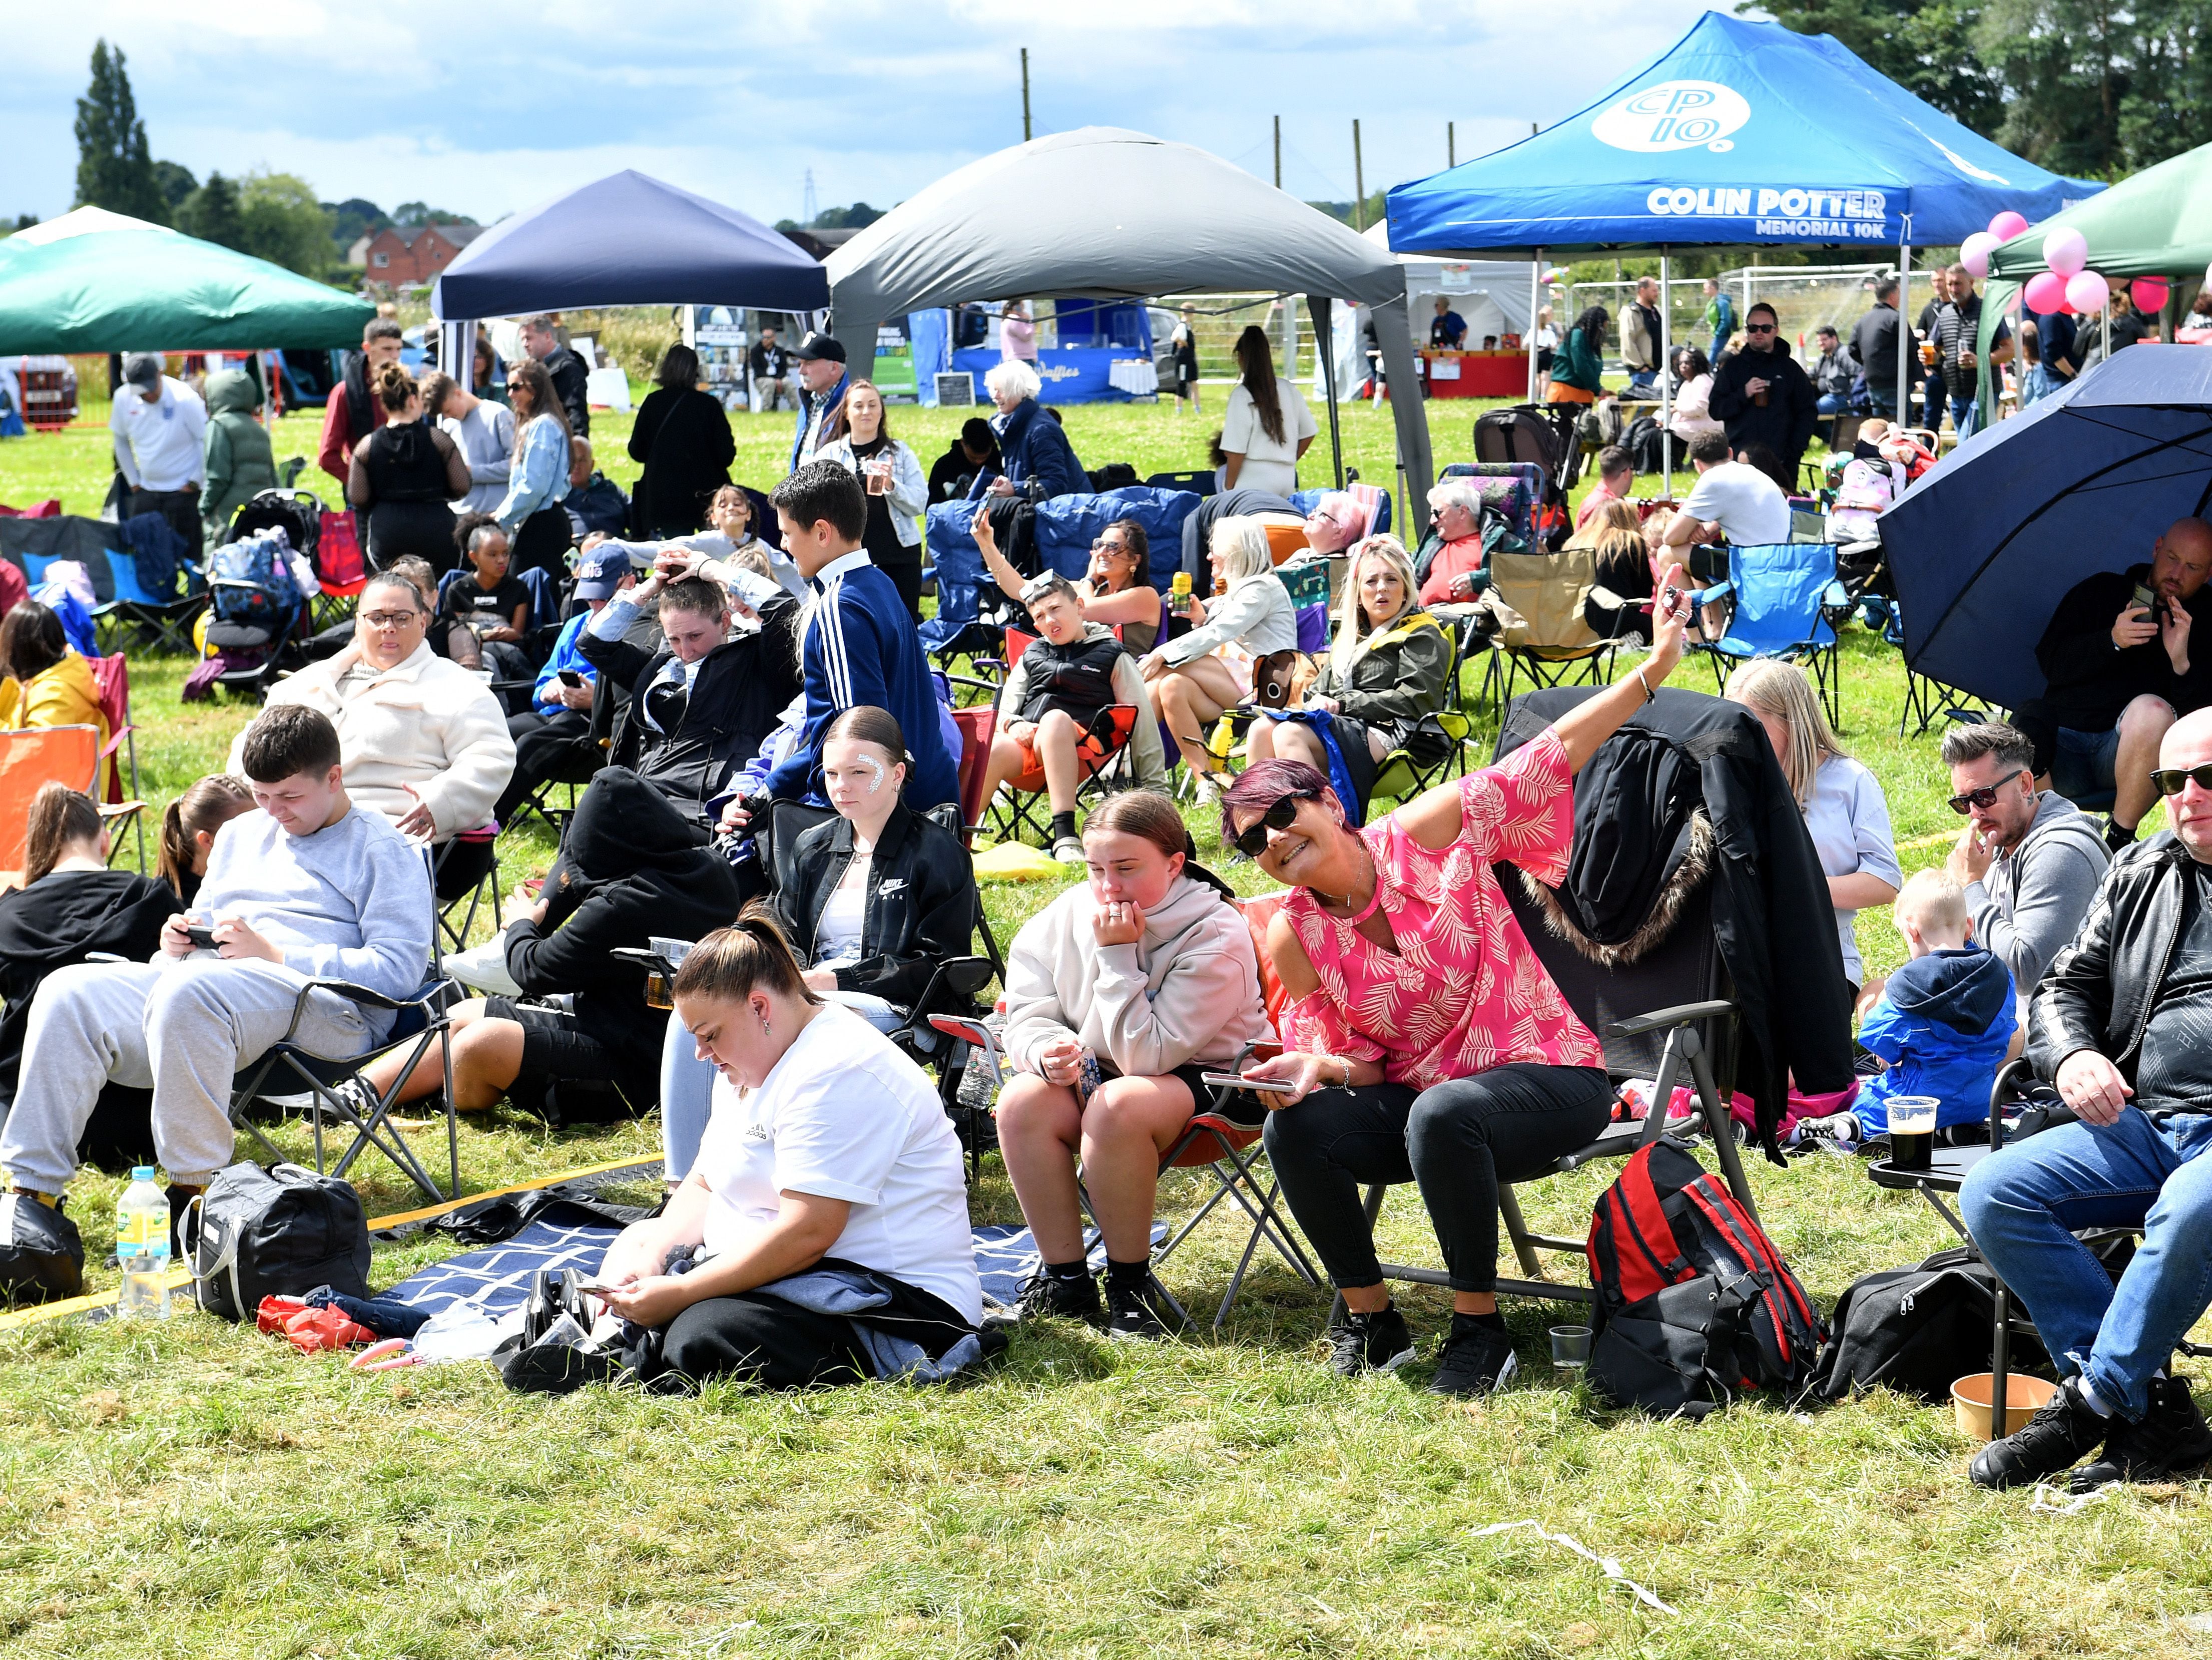 Crowds come out for nostalgia, music, comedy. stars and family fun  at Penkridge event